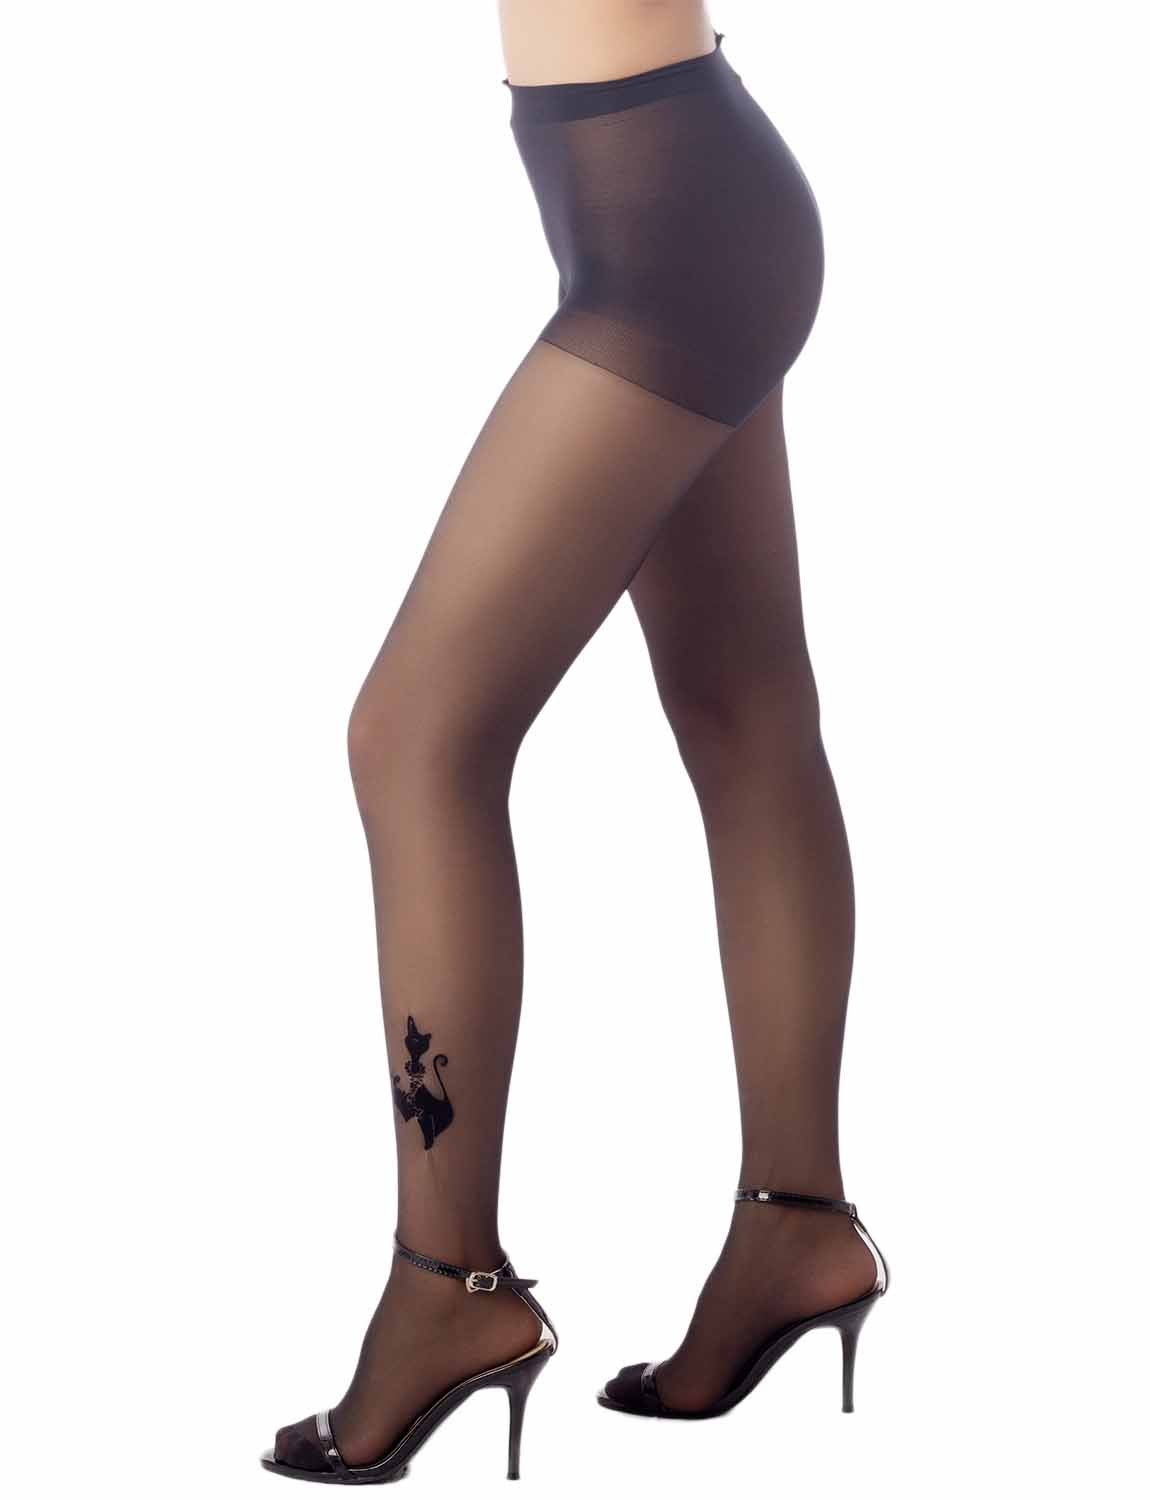 Women's Cat Tattoo Ankle Print Seamless Ultra Sheer Sexy Tights Pantyhose